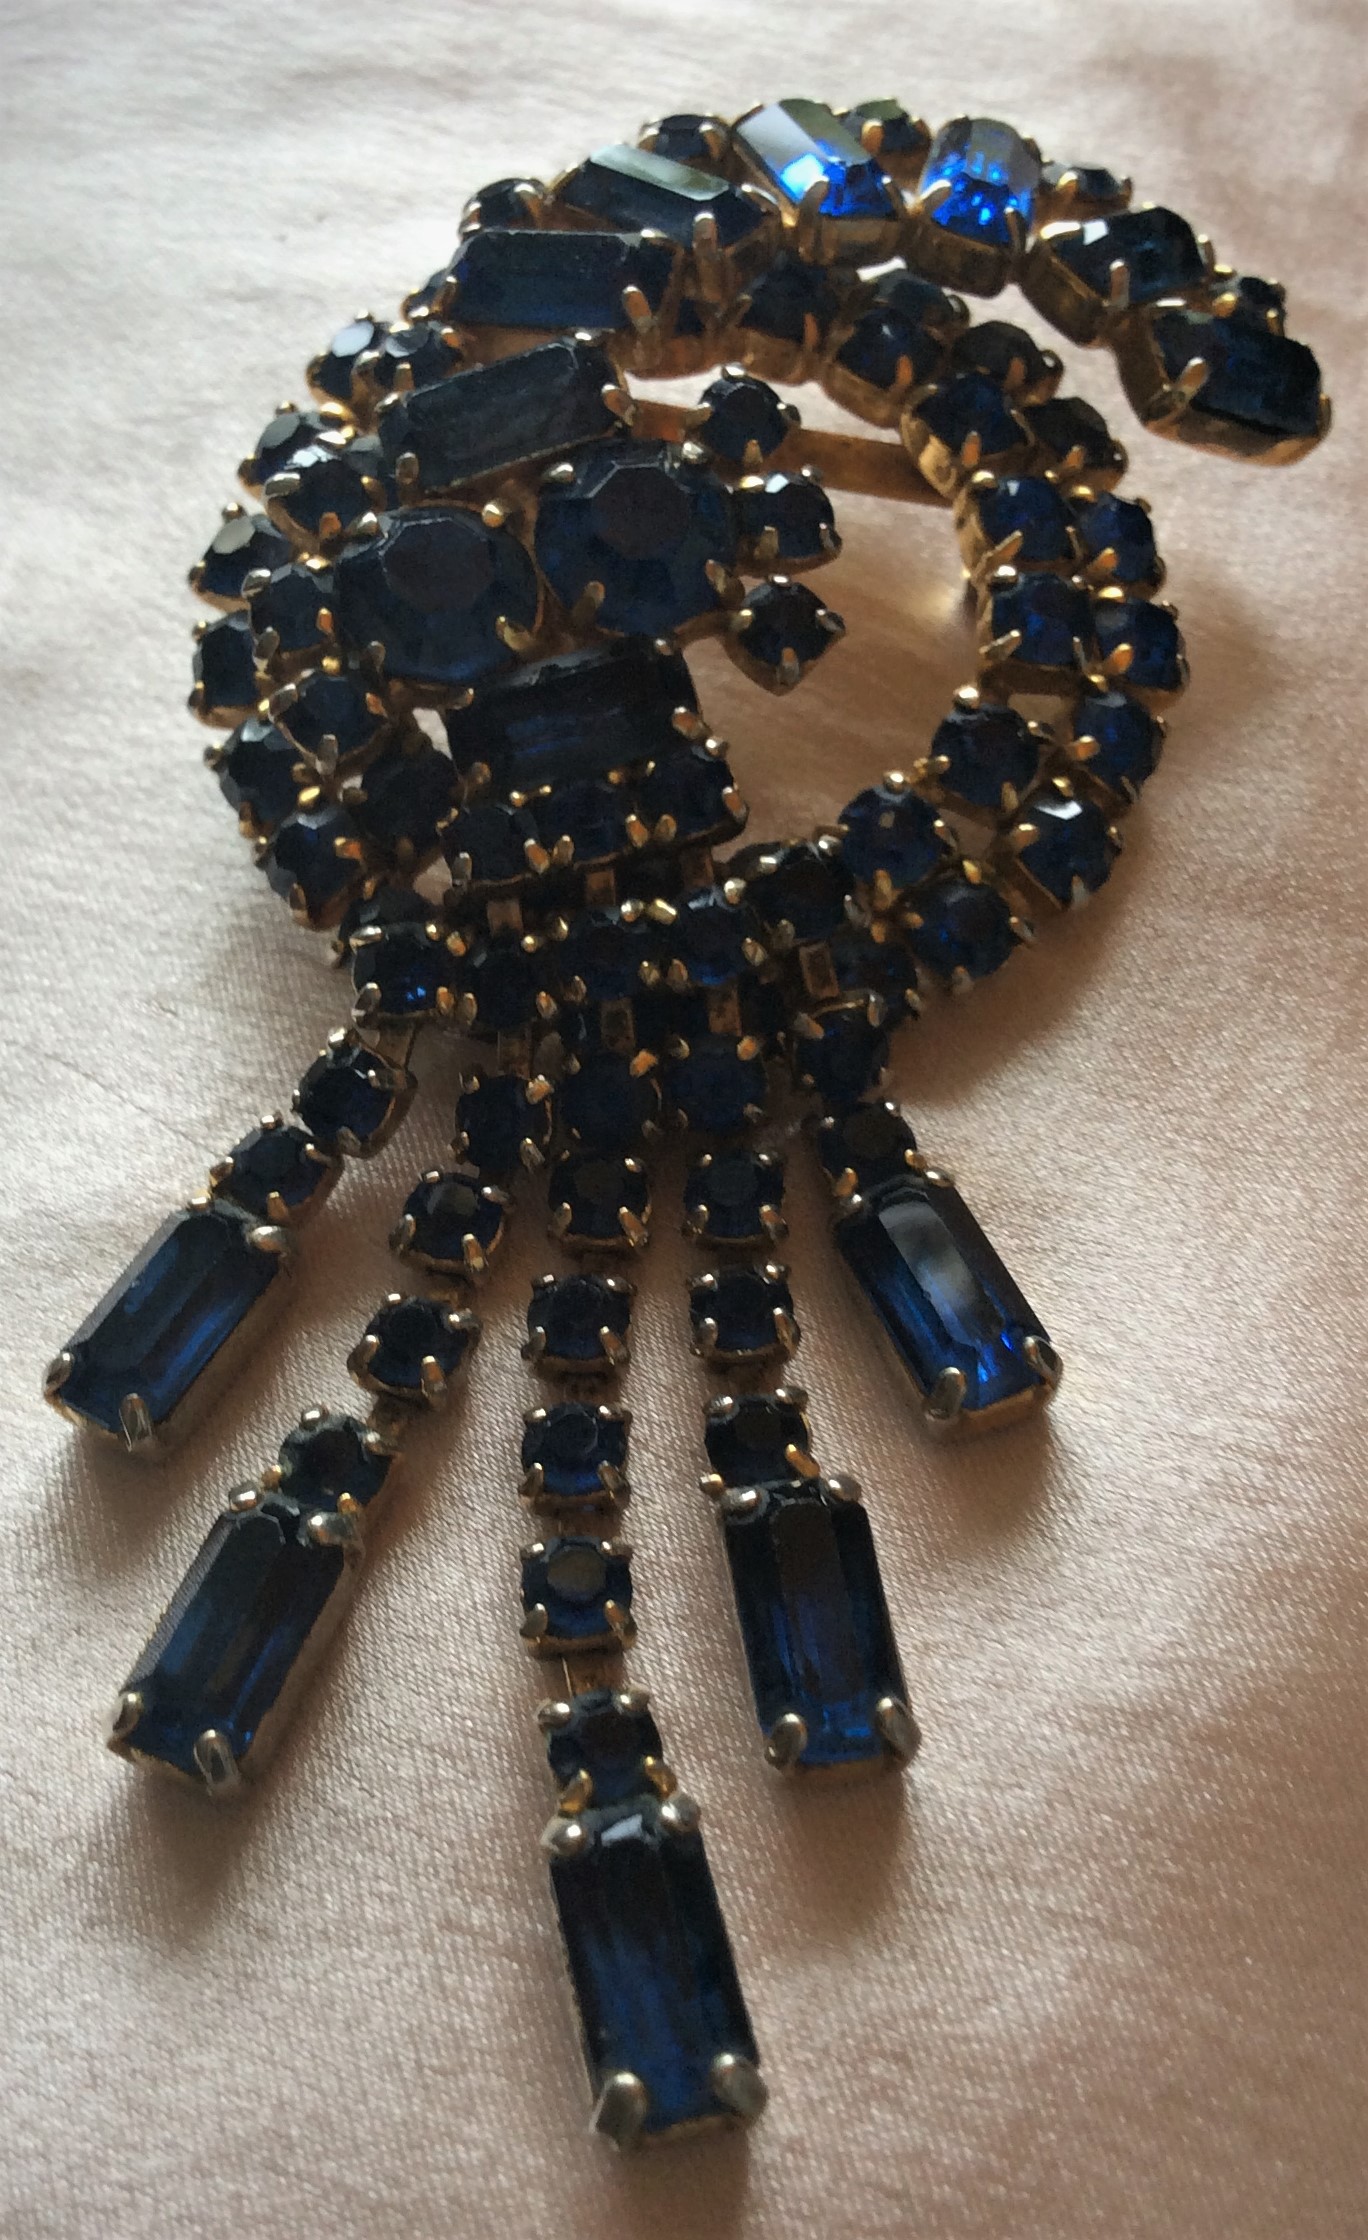 Fabulous Vintage 50s Large Circle Brooch Pin with Blue Sparkling Rhinestones and dangling oscillating cascade Size: width: 5cm length 9.5cm